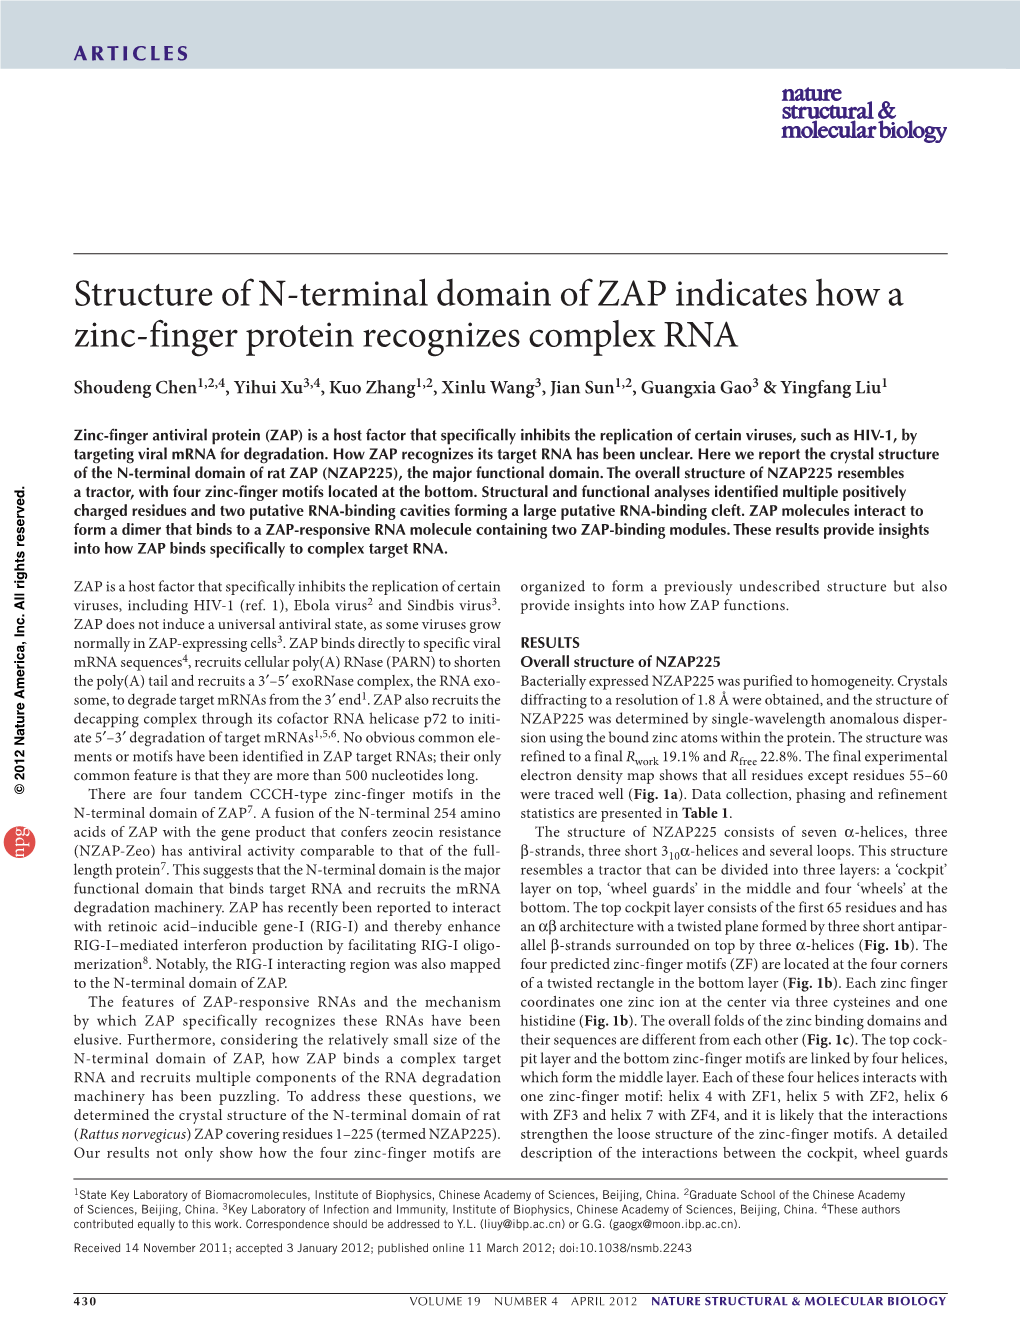 Structure of N-Terminal Domain of ZAP Indicates How a Zinc-Finger Protein Recognizes Complex RNA